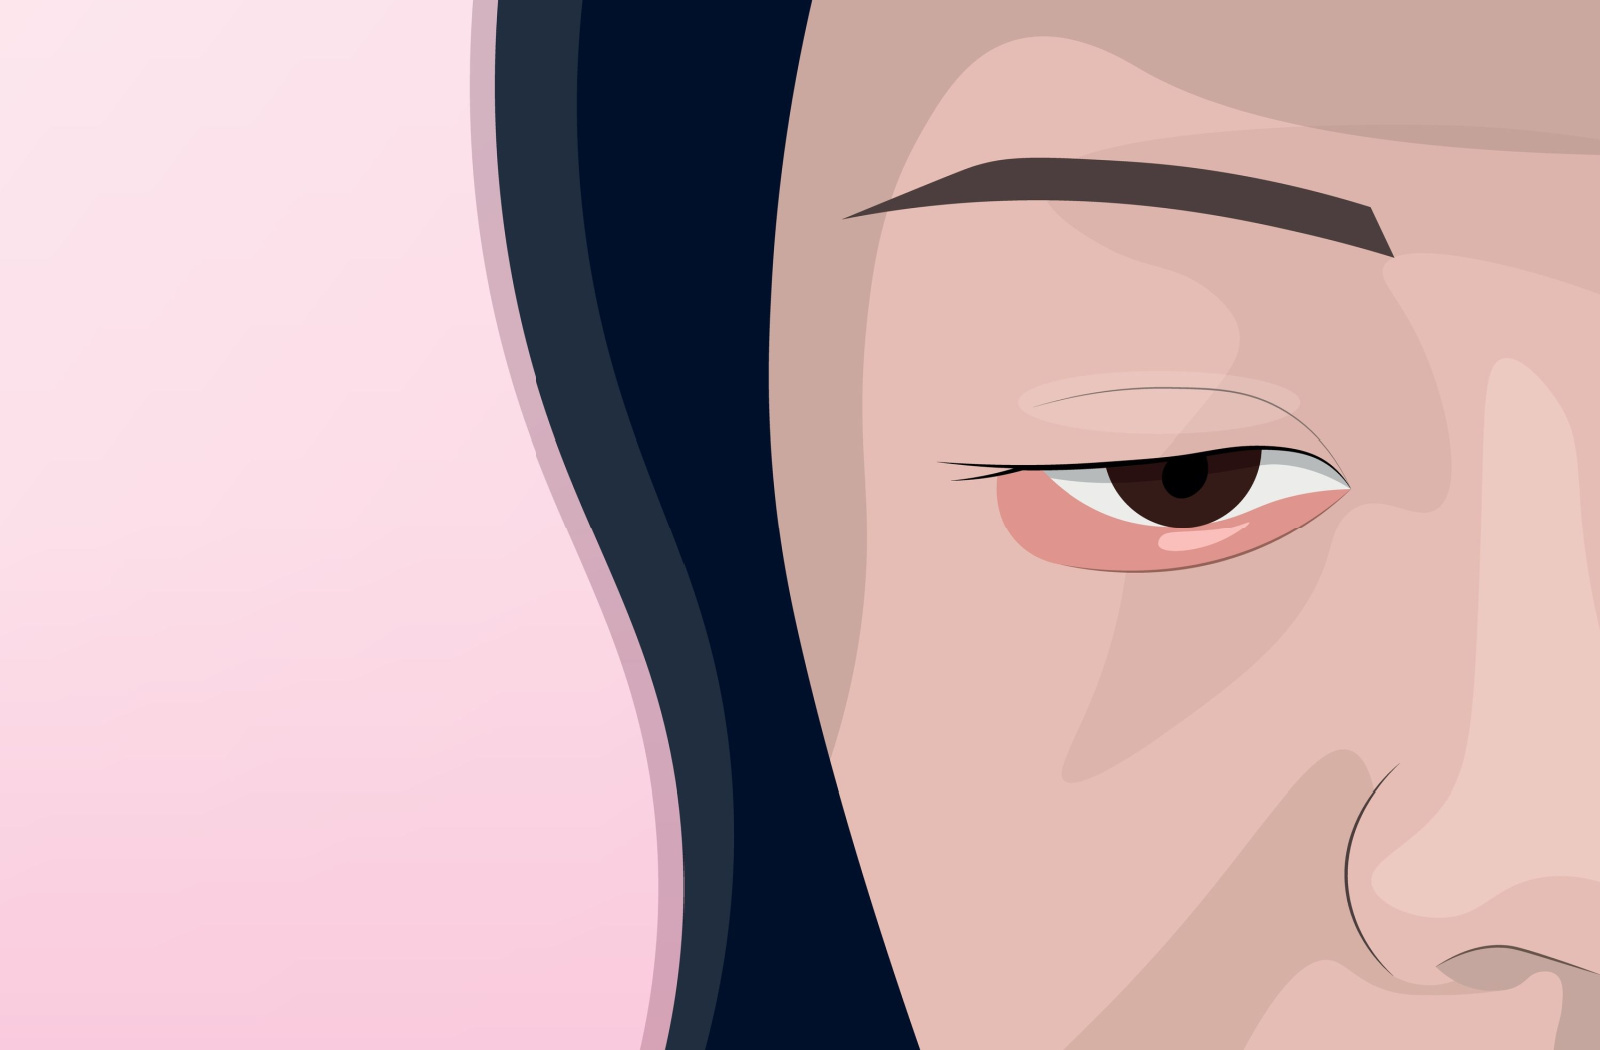 A digital image portraying a close-up view of a woman's face and eye with meibomian gland dysfunction present on her eyelid